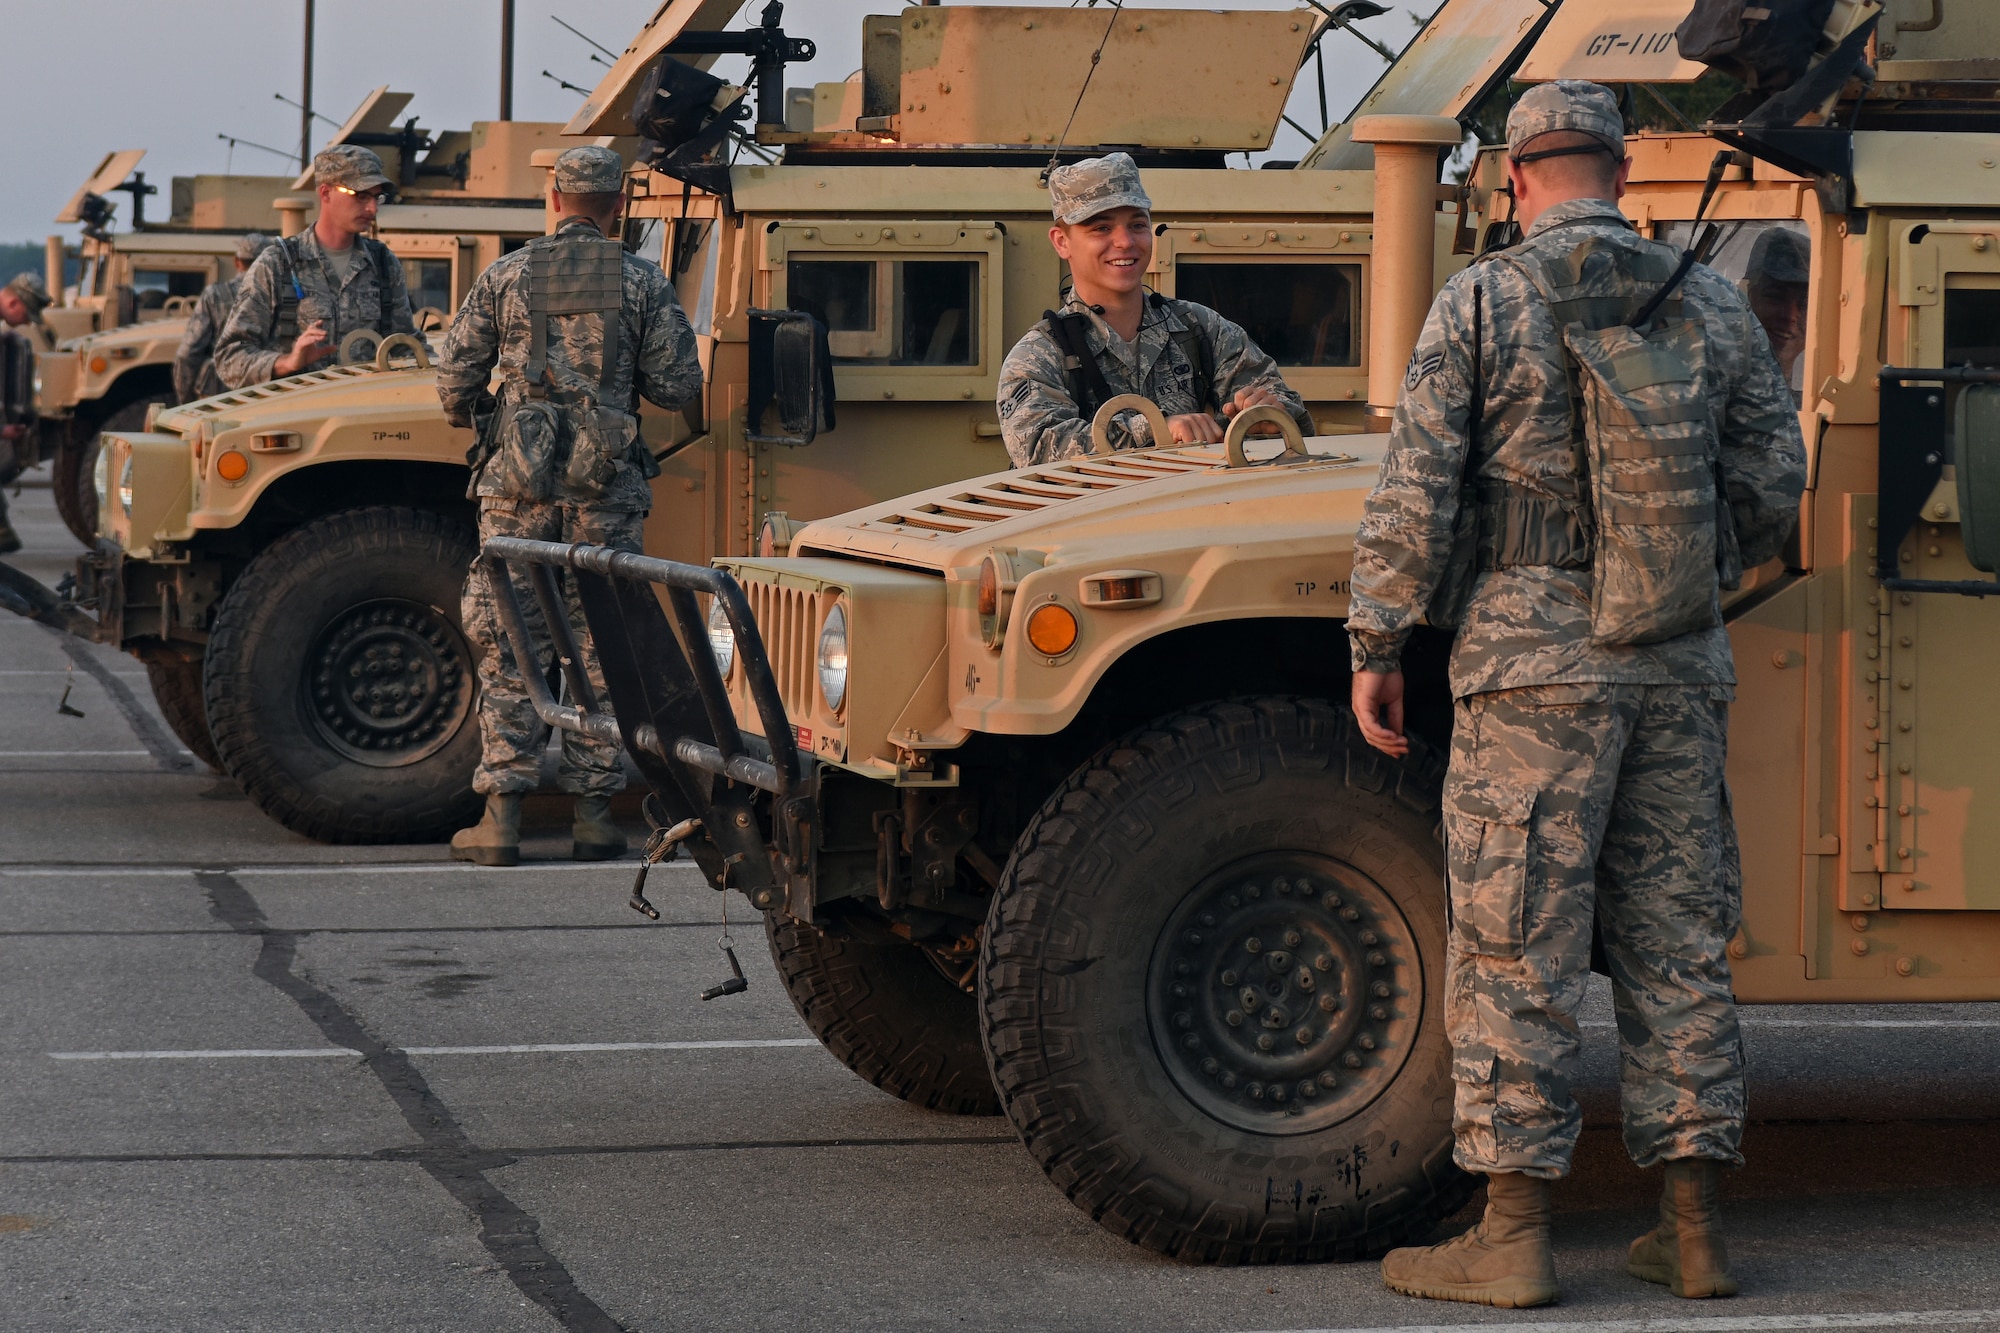 U.S. Airmen with the 121st Security Forces Squadron inspect their vehicles before departing for Camp Grayling Joint Maneuver Training Center, Mich. Aug. 17, 2015. The Airmen spent three days at Camp Grayling in a simulated deployed environment as a part of their annual training. (U.S. Air National Guard photo by Airman Ashley Williams/Released)